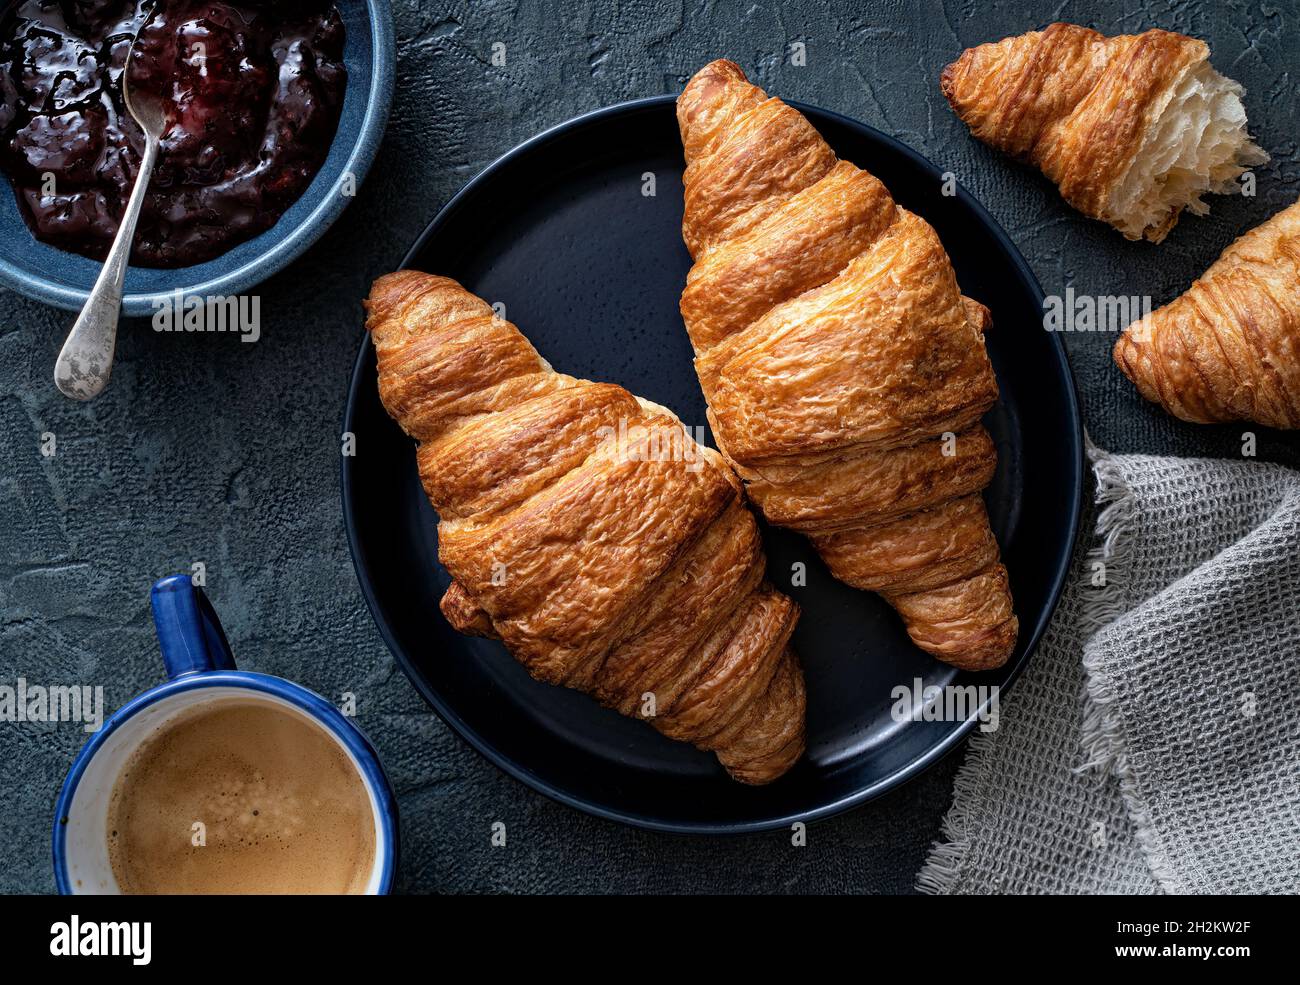 Delicious buttery croissants with jam and coffee on a blue background. Stock Photo